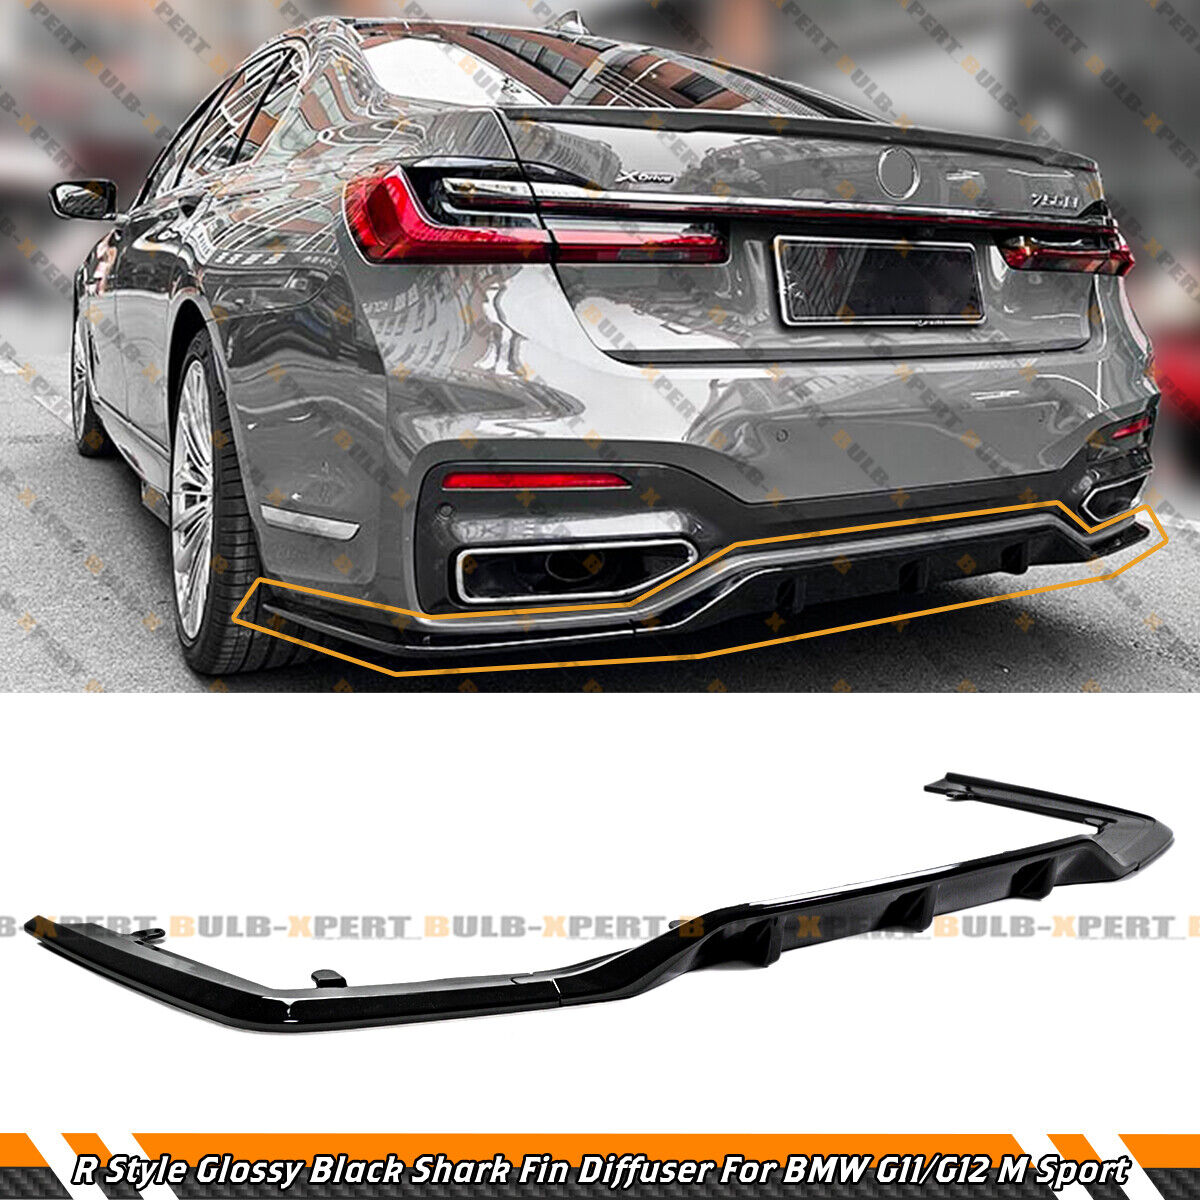 For 2019-22 BMW G11 G12 7 Series M Sport R Style Glossy Black Shark Fin Diffuser